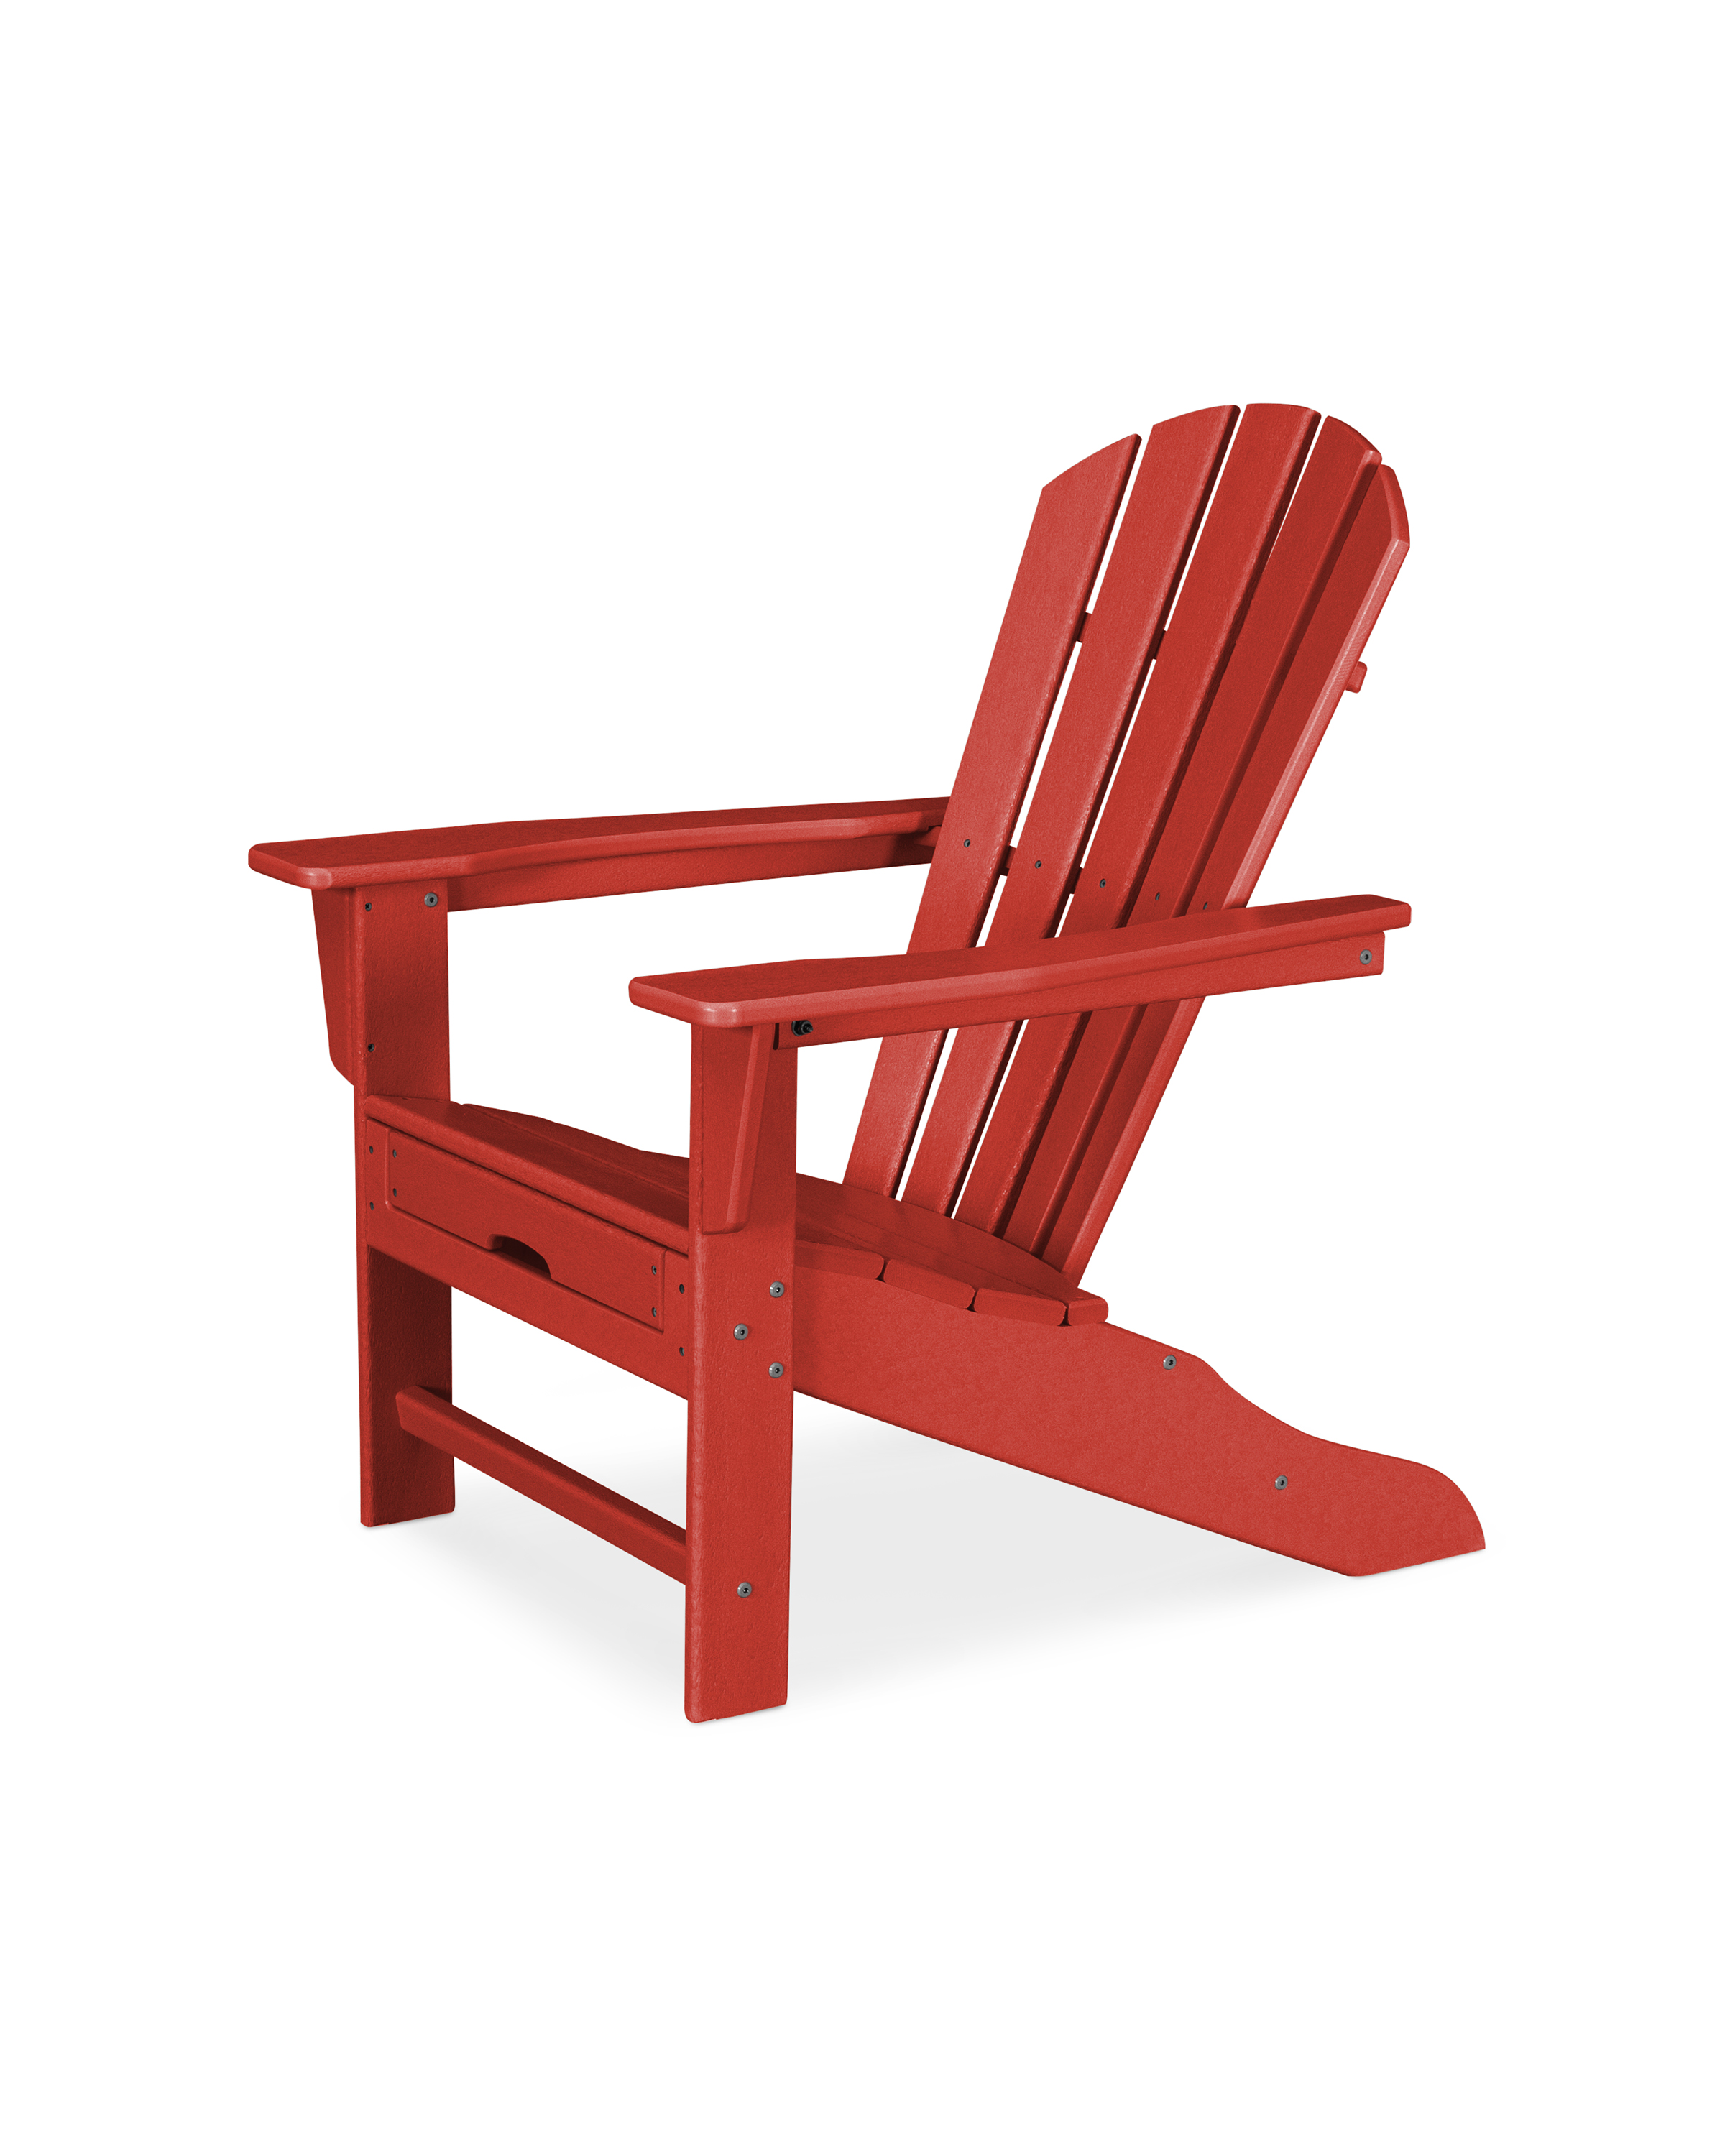 palm coast ultimate adirondack with hideaway ottoman in sunset red thumbnail image